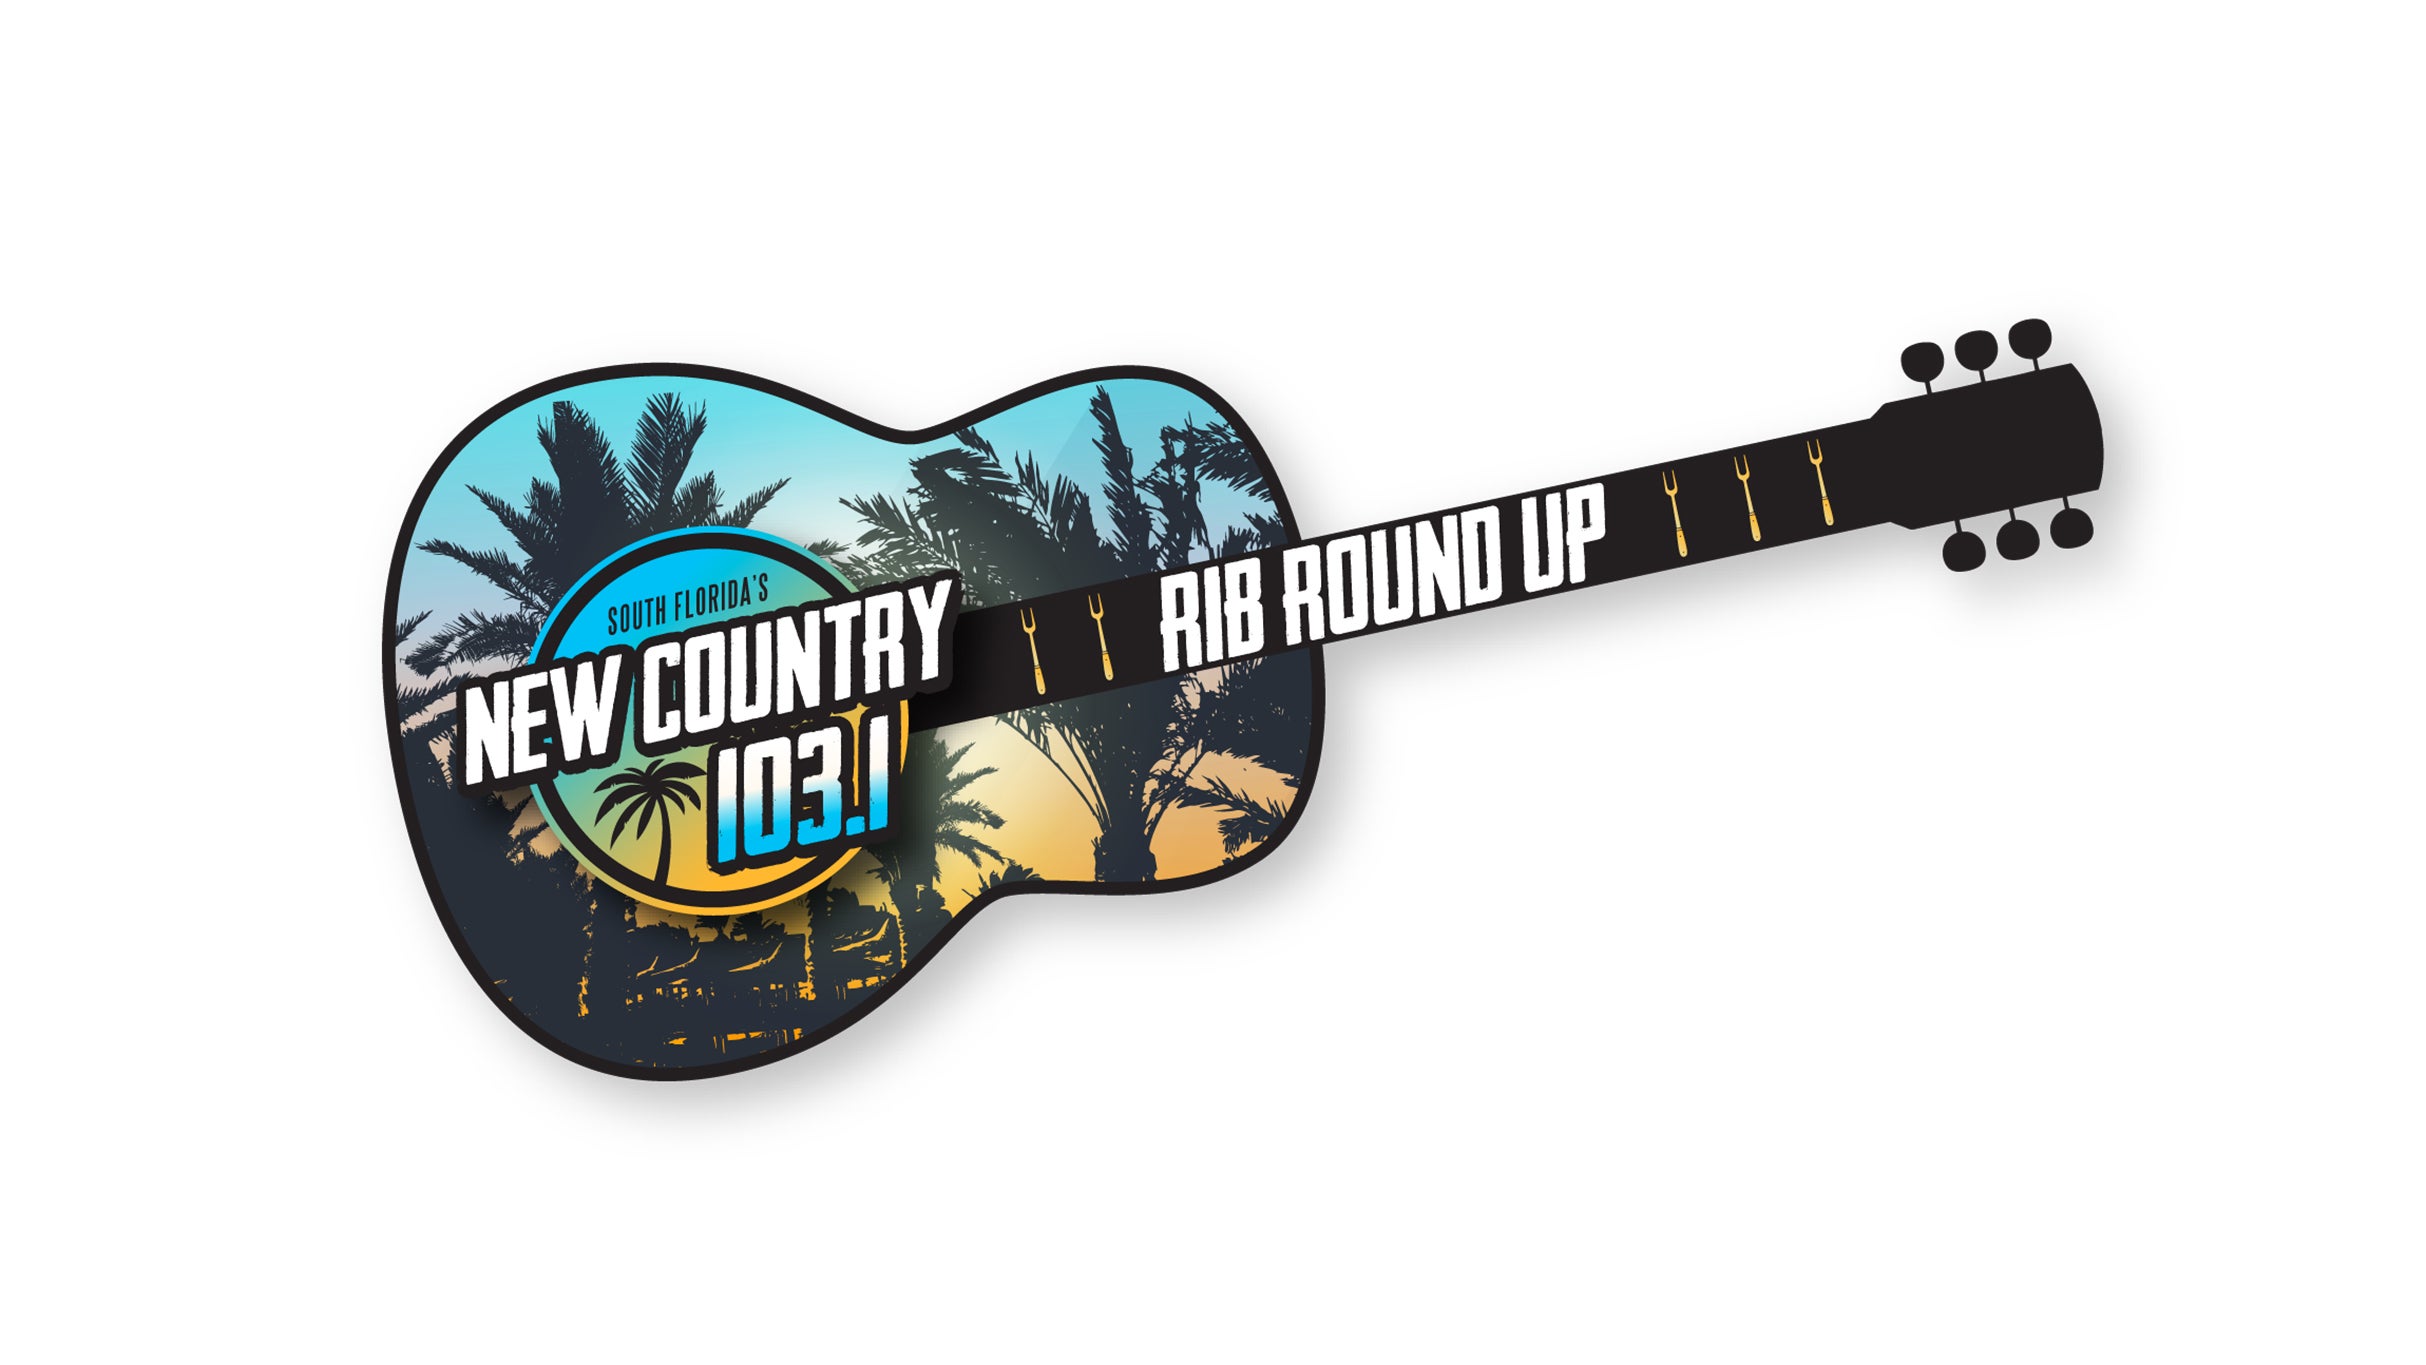 New Country 103.1 presents Rib Round Up in West Palm Beach promo photo for Ticketmaster presale offer code